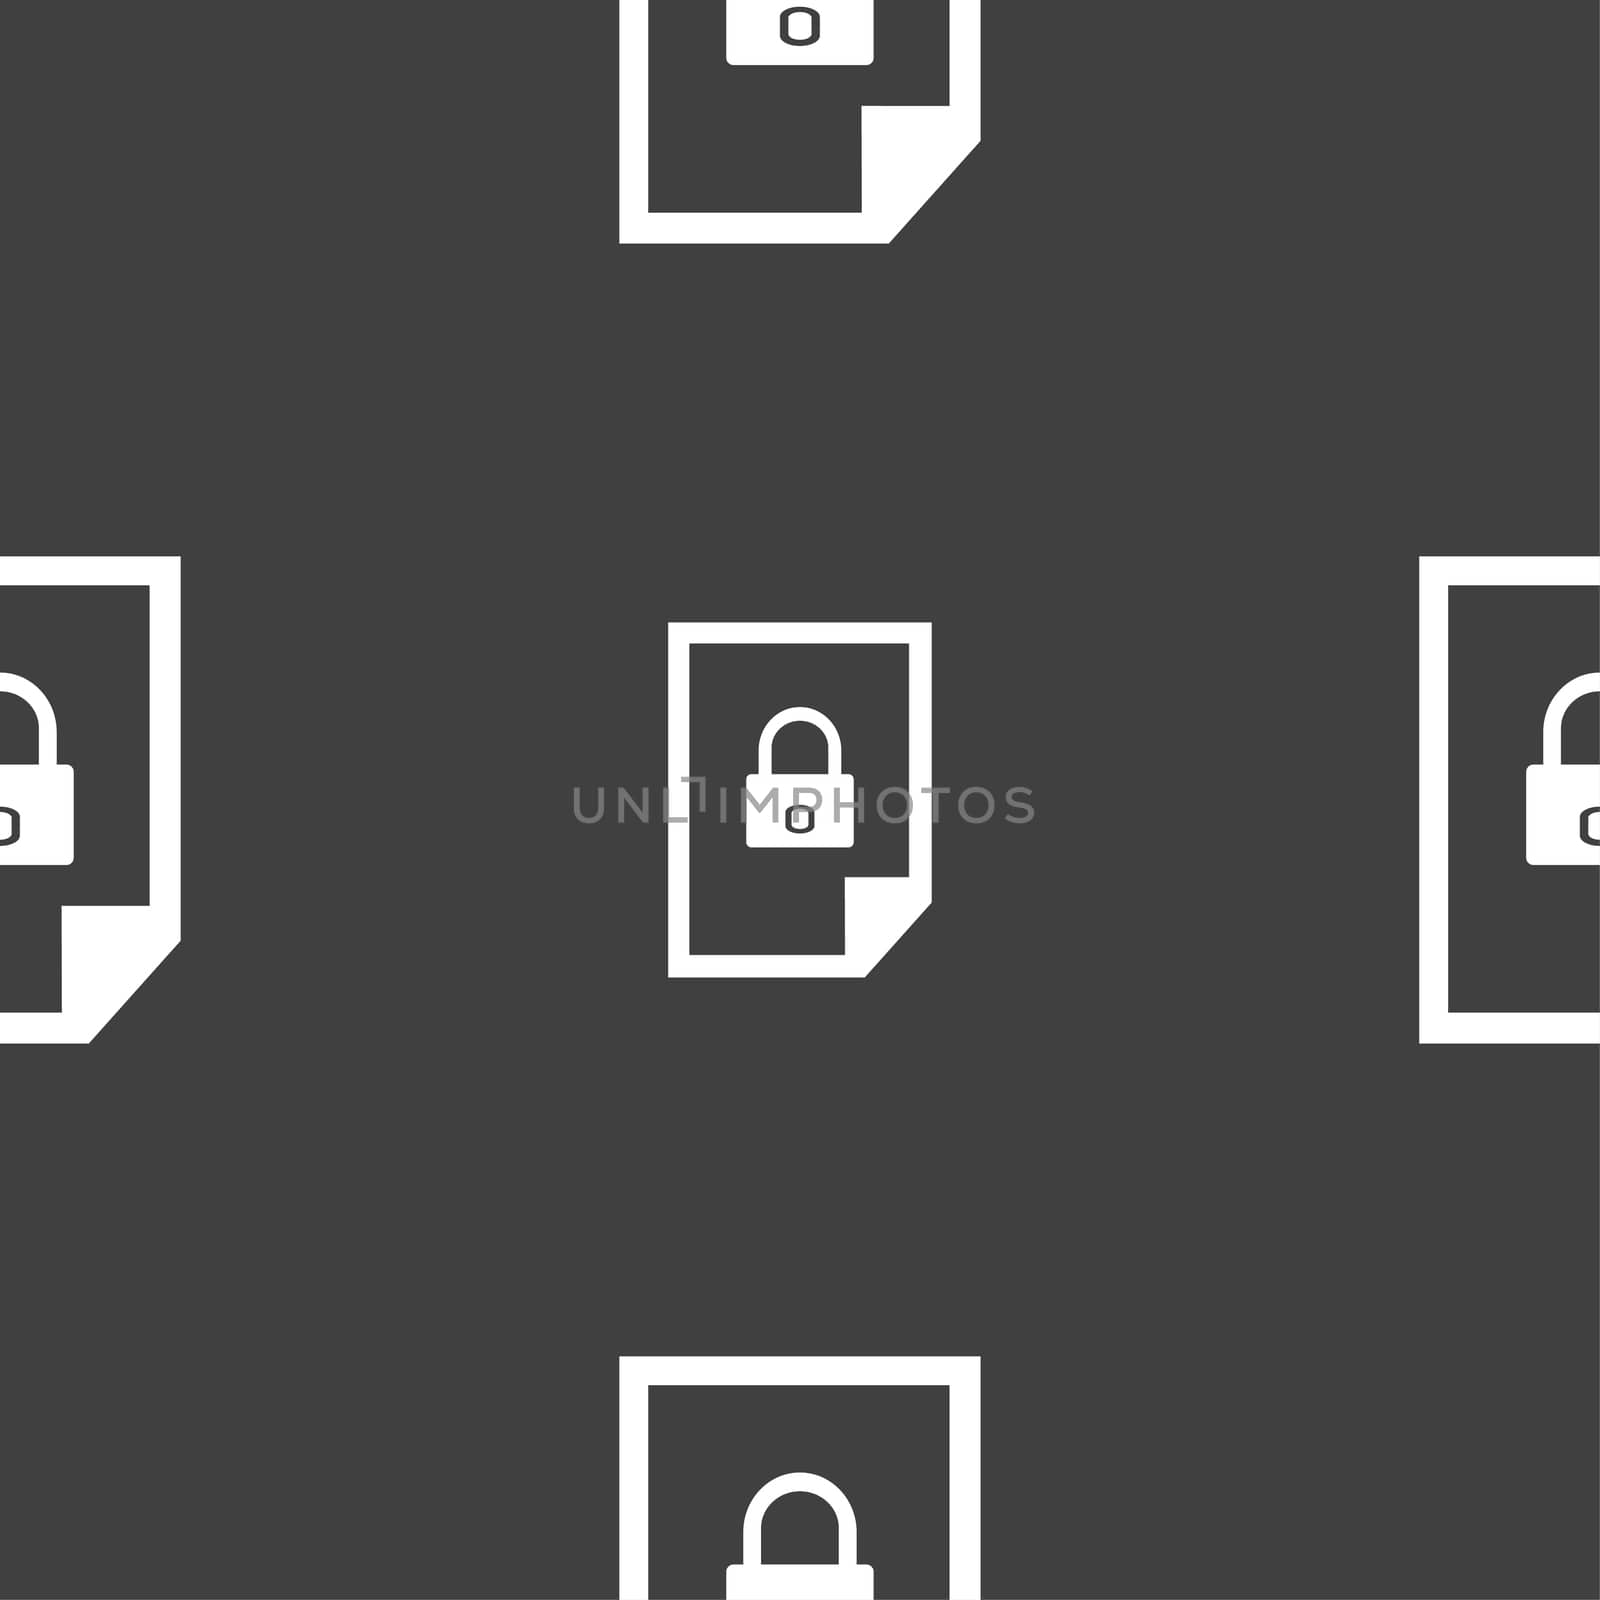 File locked icon sign. Seamless pattern on a gray background. illustration